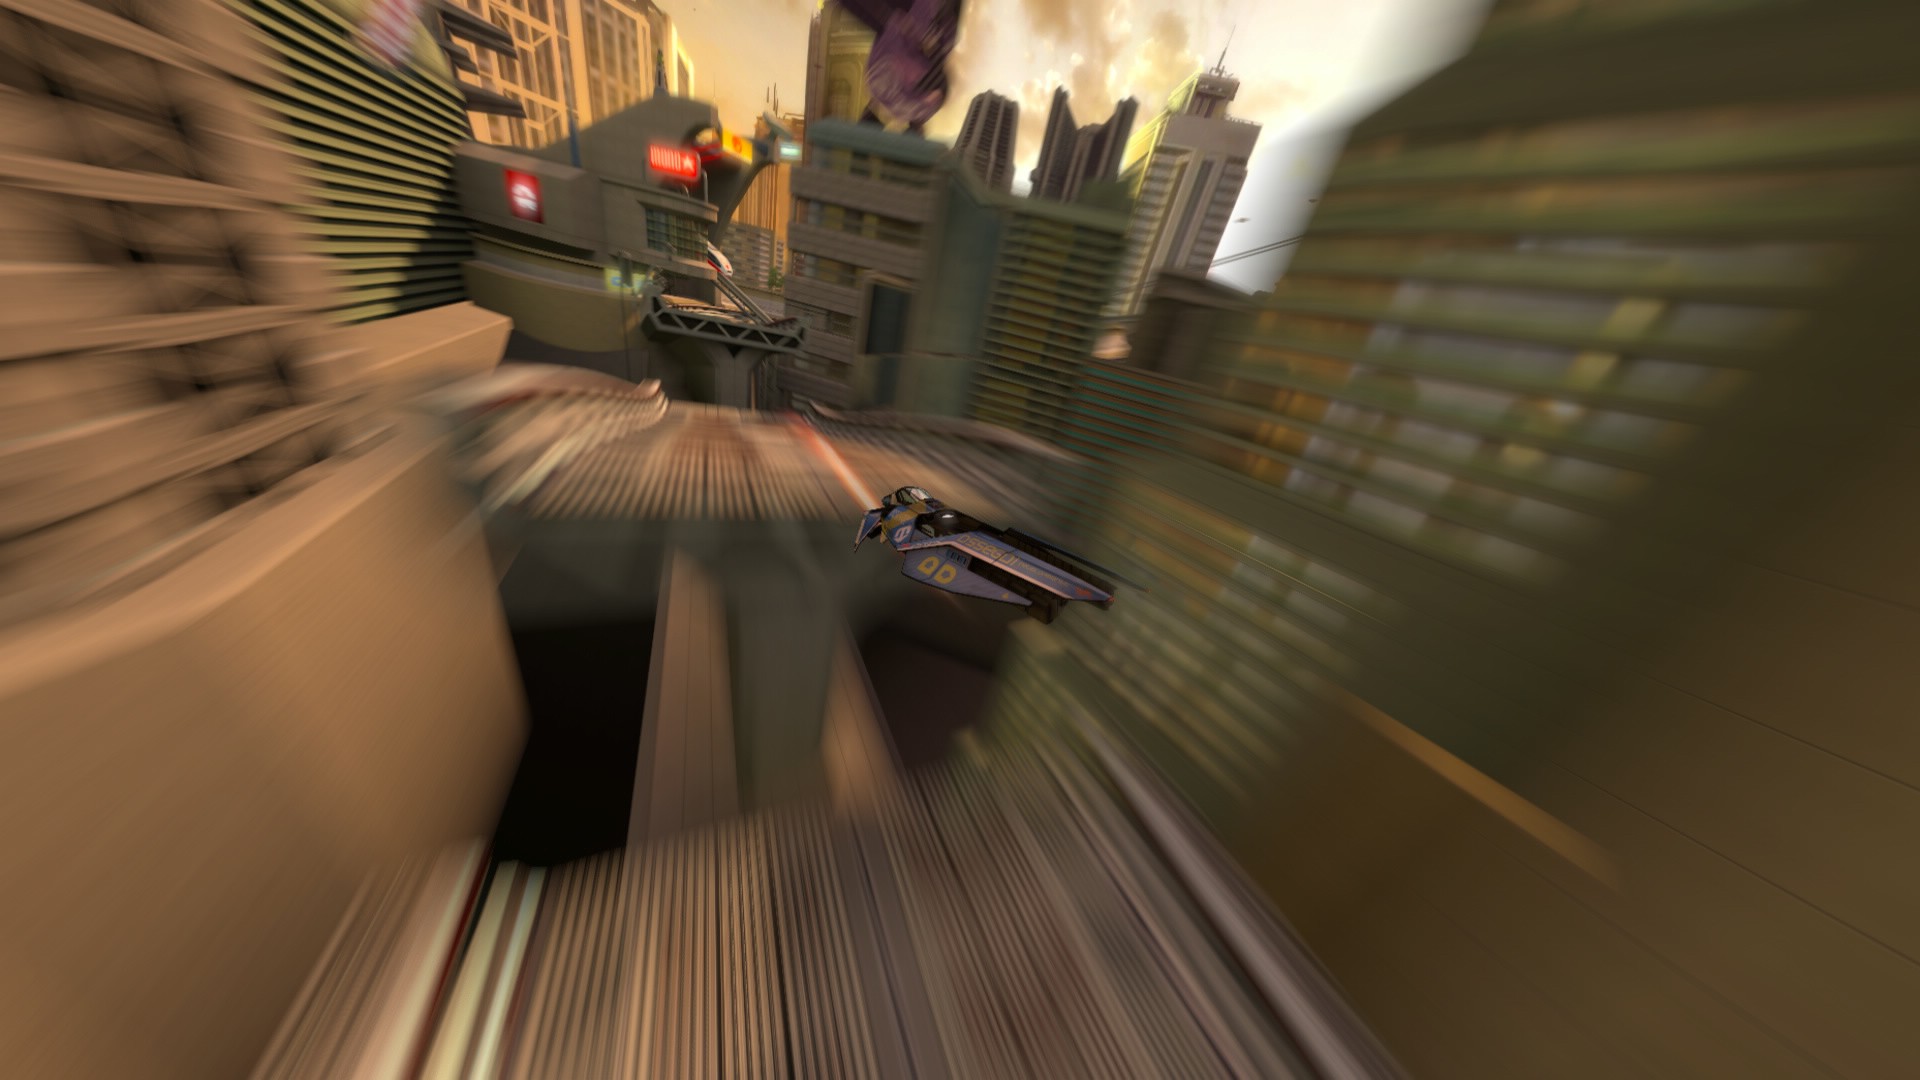 Video Games Wipeout Wipeout HD Blurred Racing Science Fiction City 1920x1080